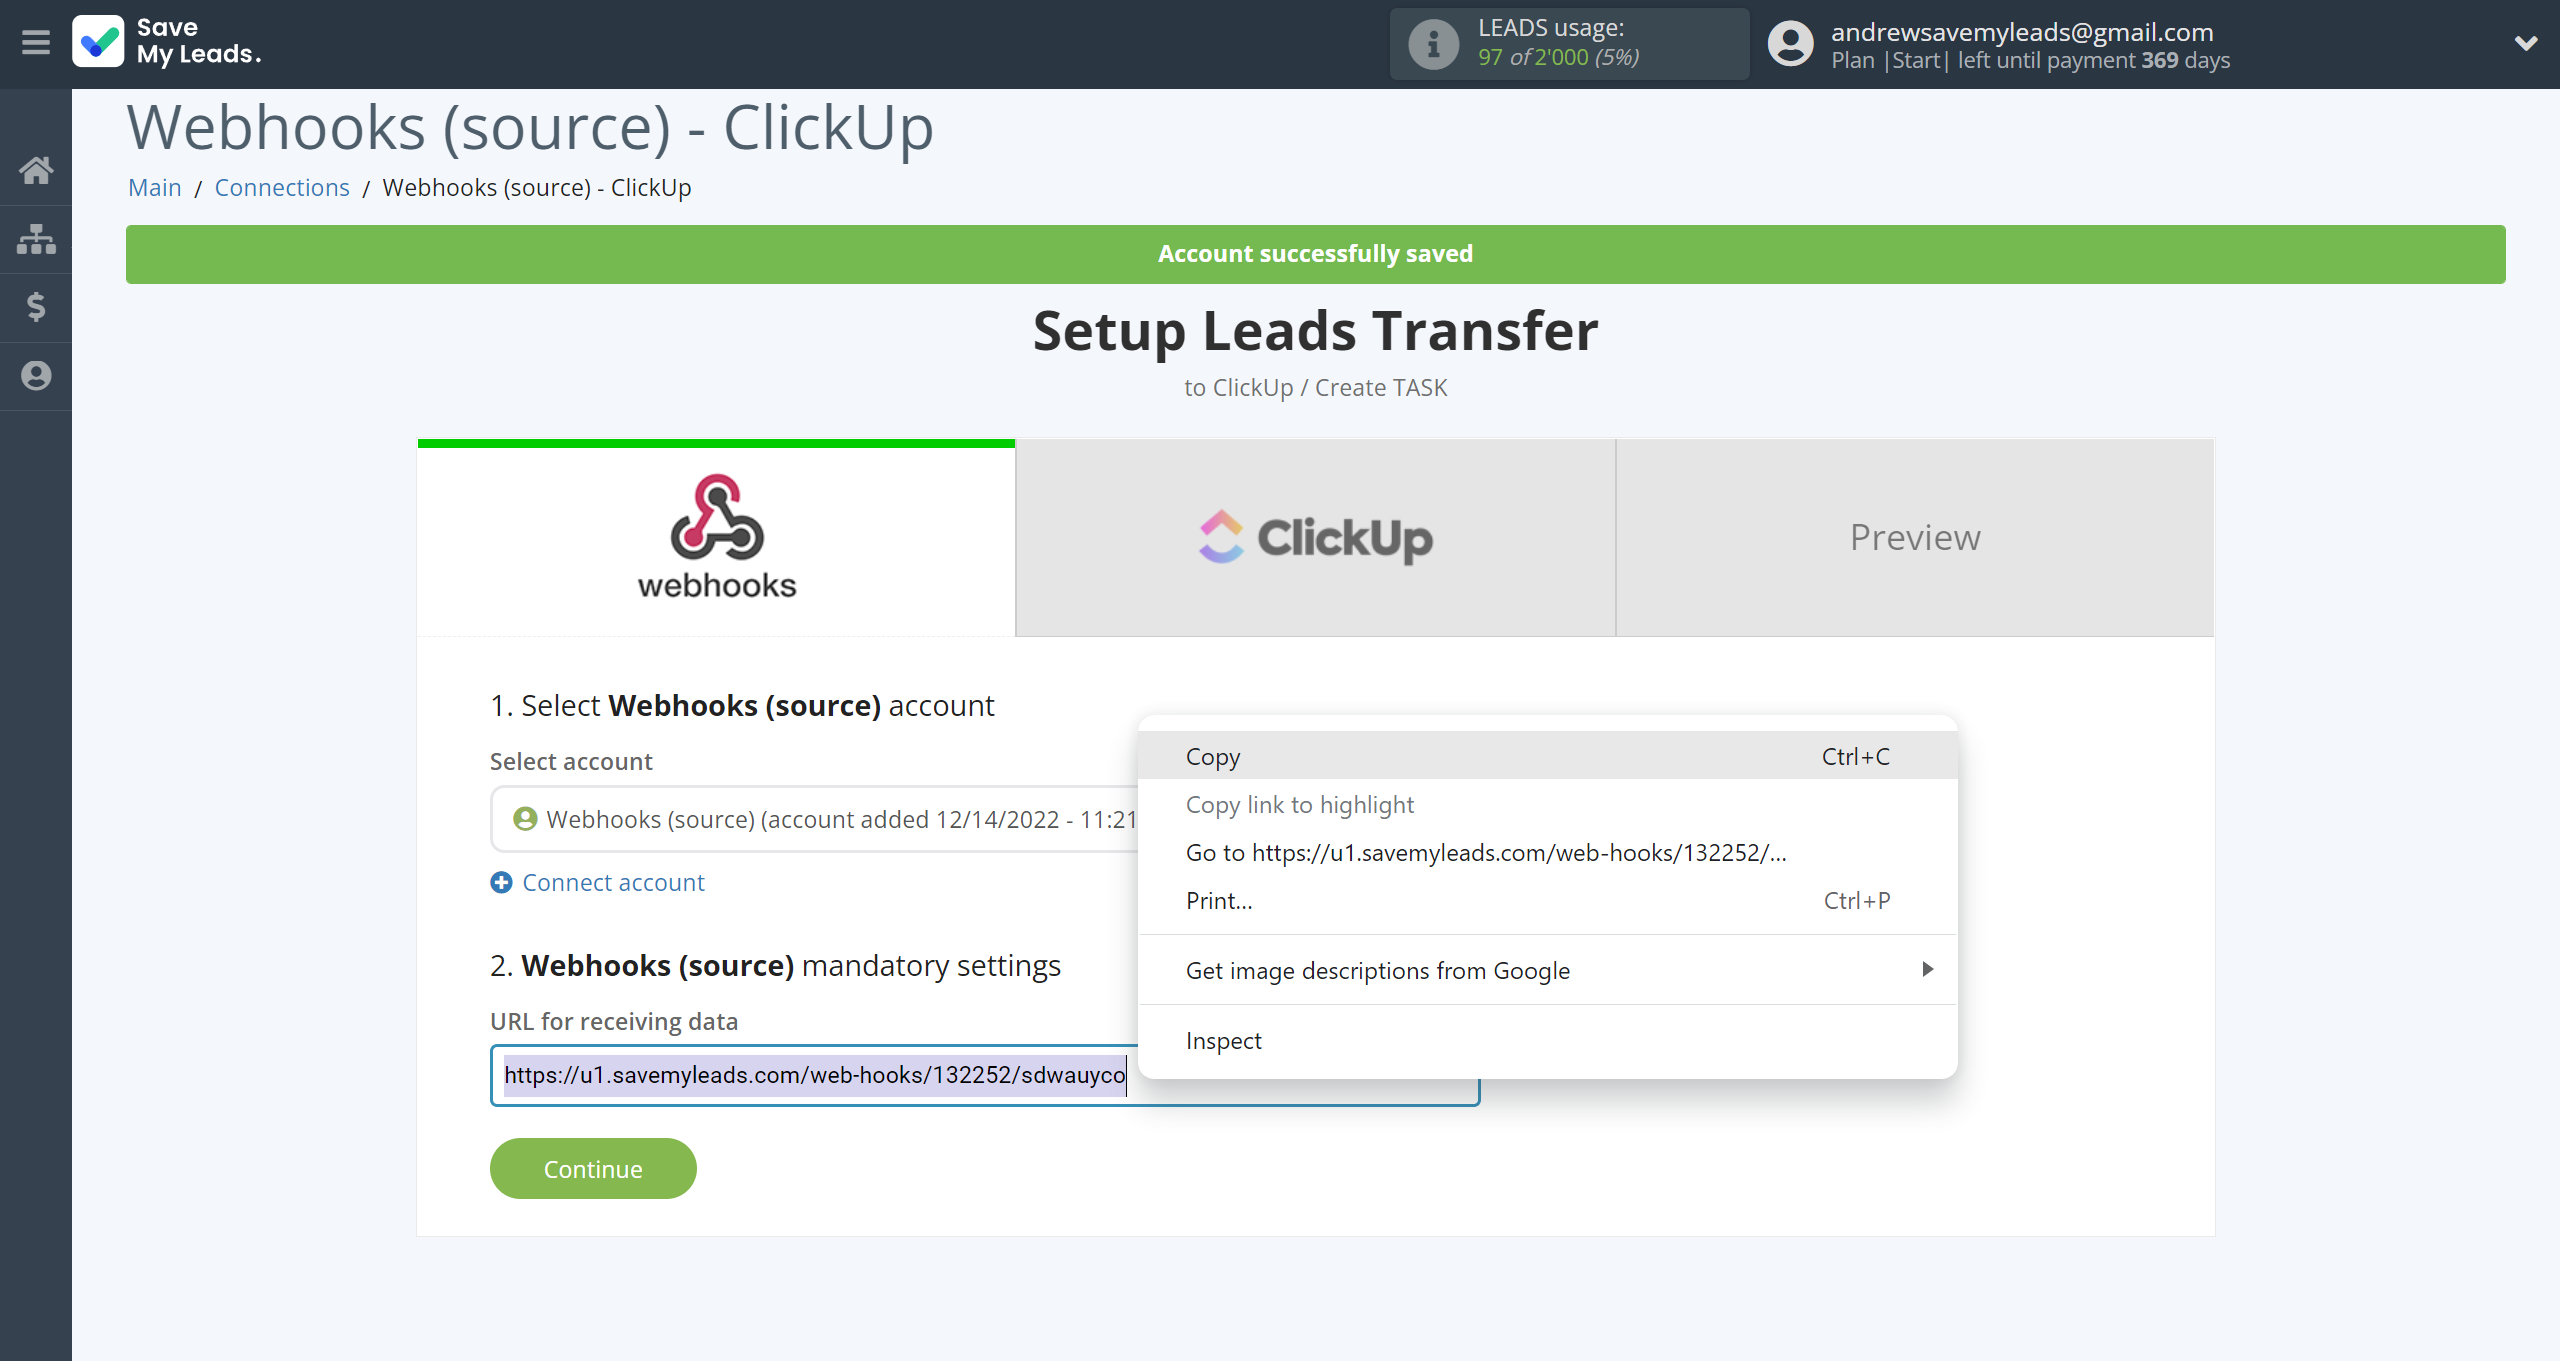 How to Connect Webhooks with ClickUp | Data Source account connection